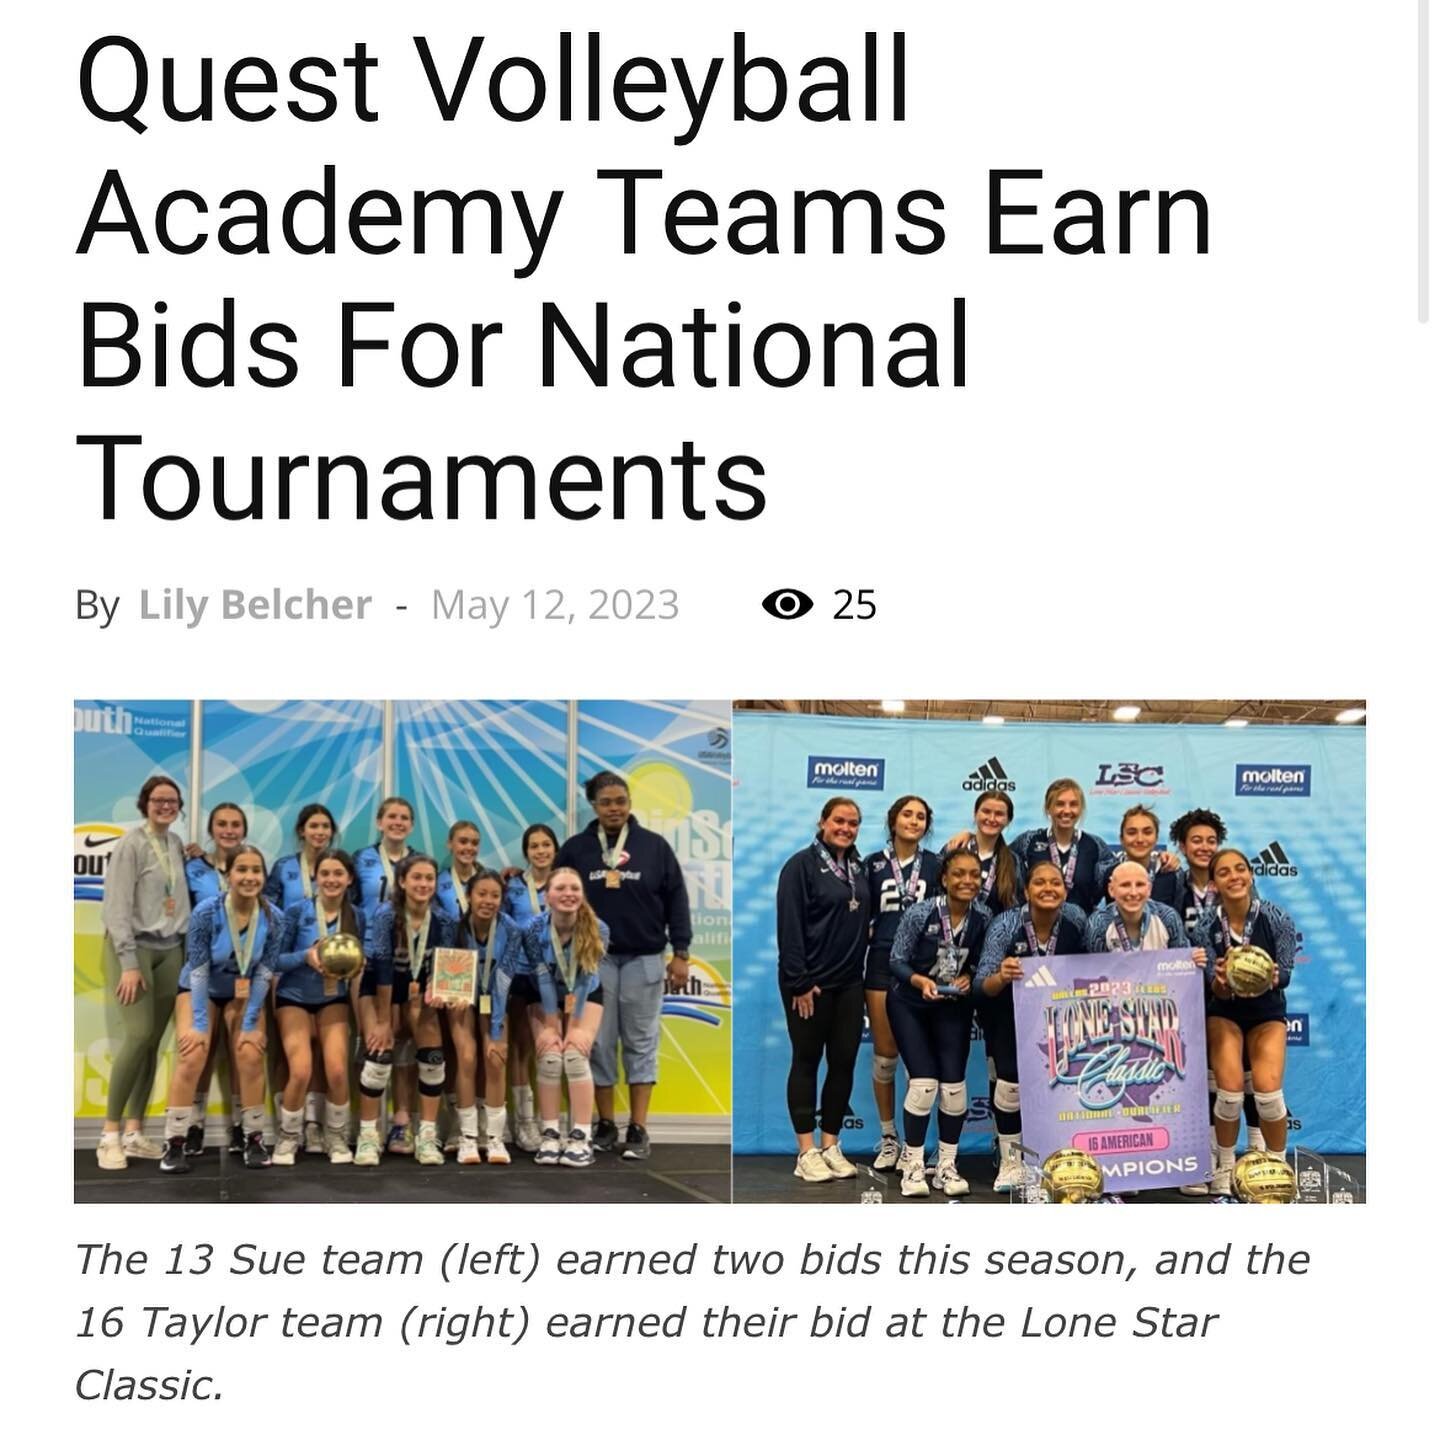 &bull; OSPREY OBSERVER &bull; 

16 Taylor and 13 Sue have been featured in the local @ospreyobserver .For the full article check here:

https://www.ospreyobserver.com/2023/05/quest-volleyball-academy-teams-earn-bids-for-national-tournaments/